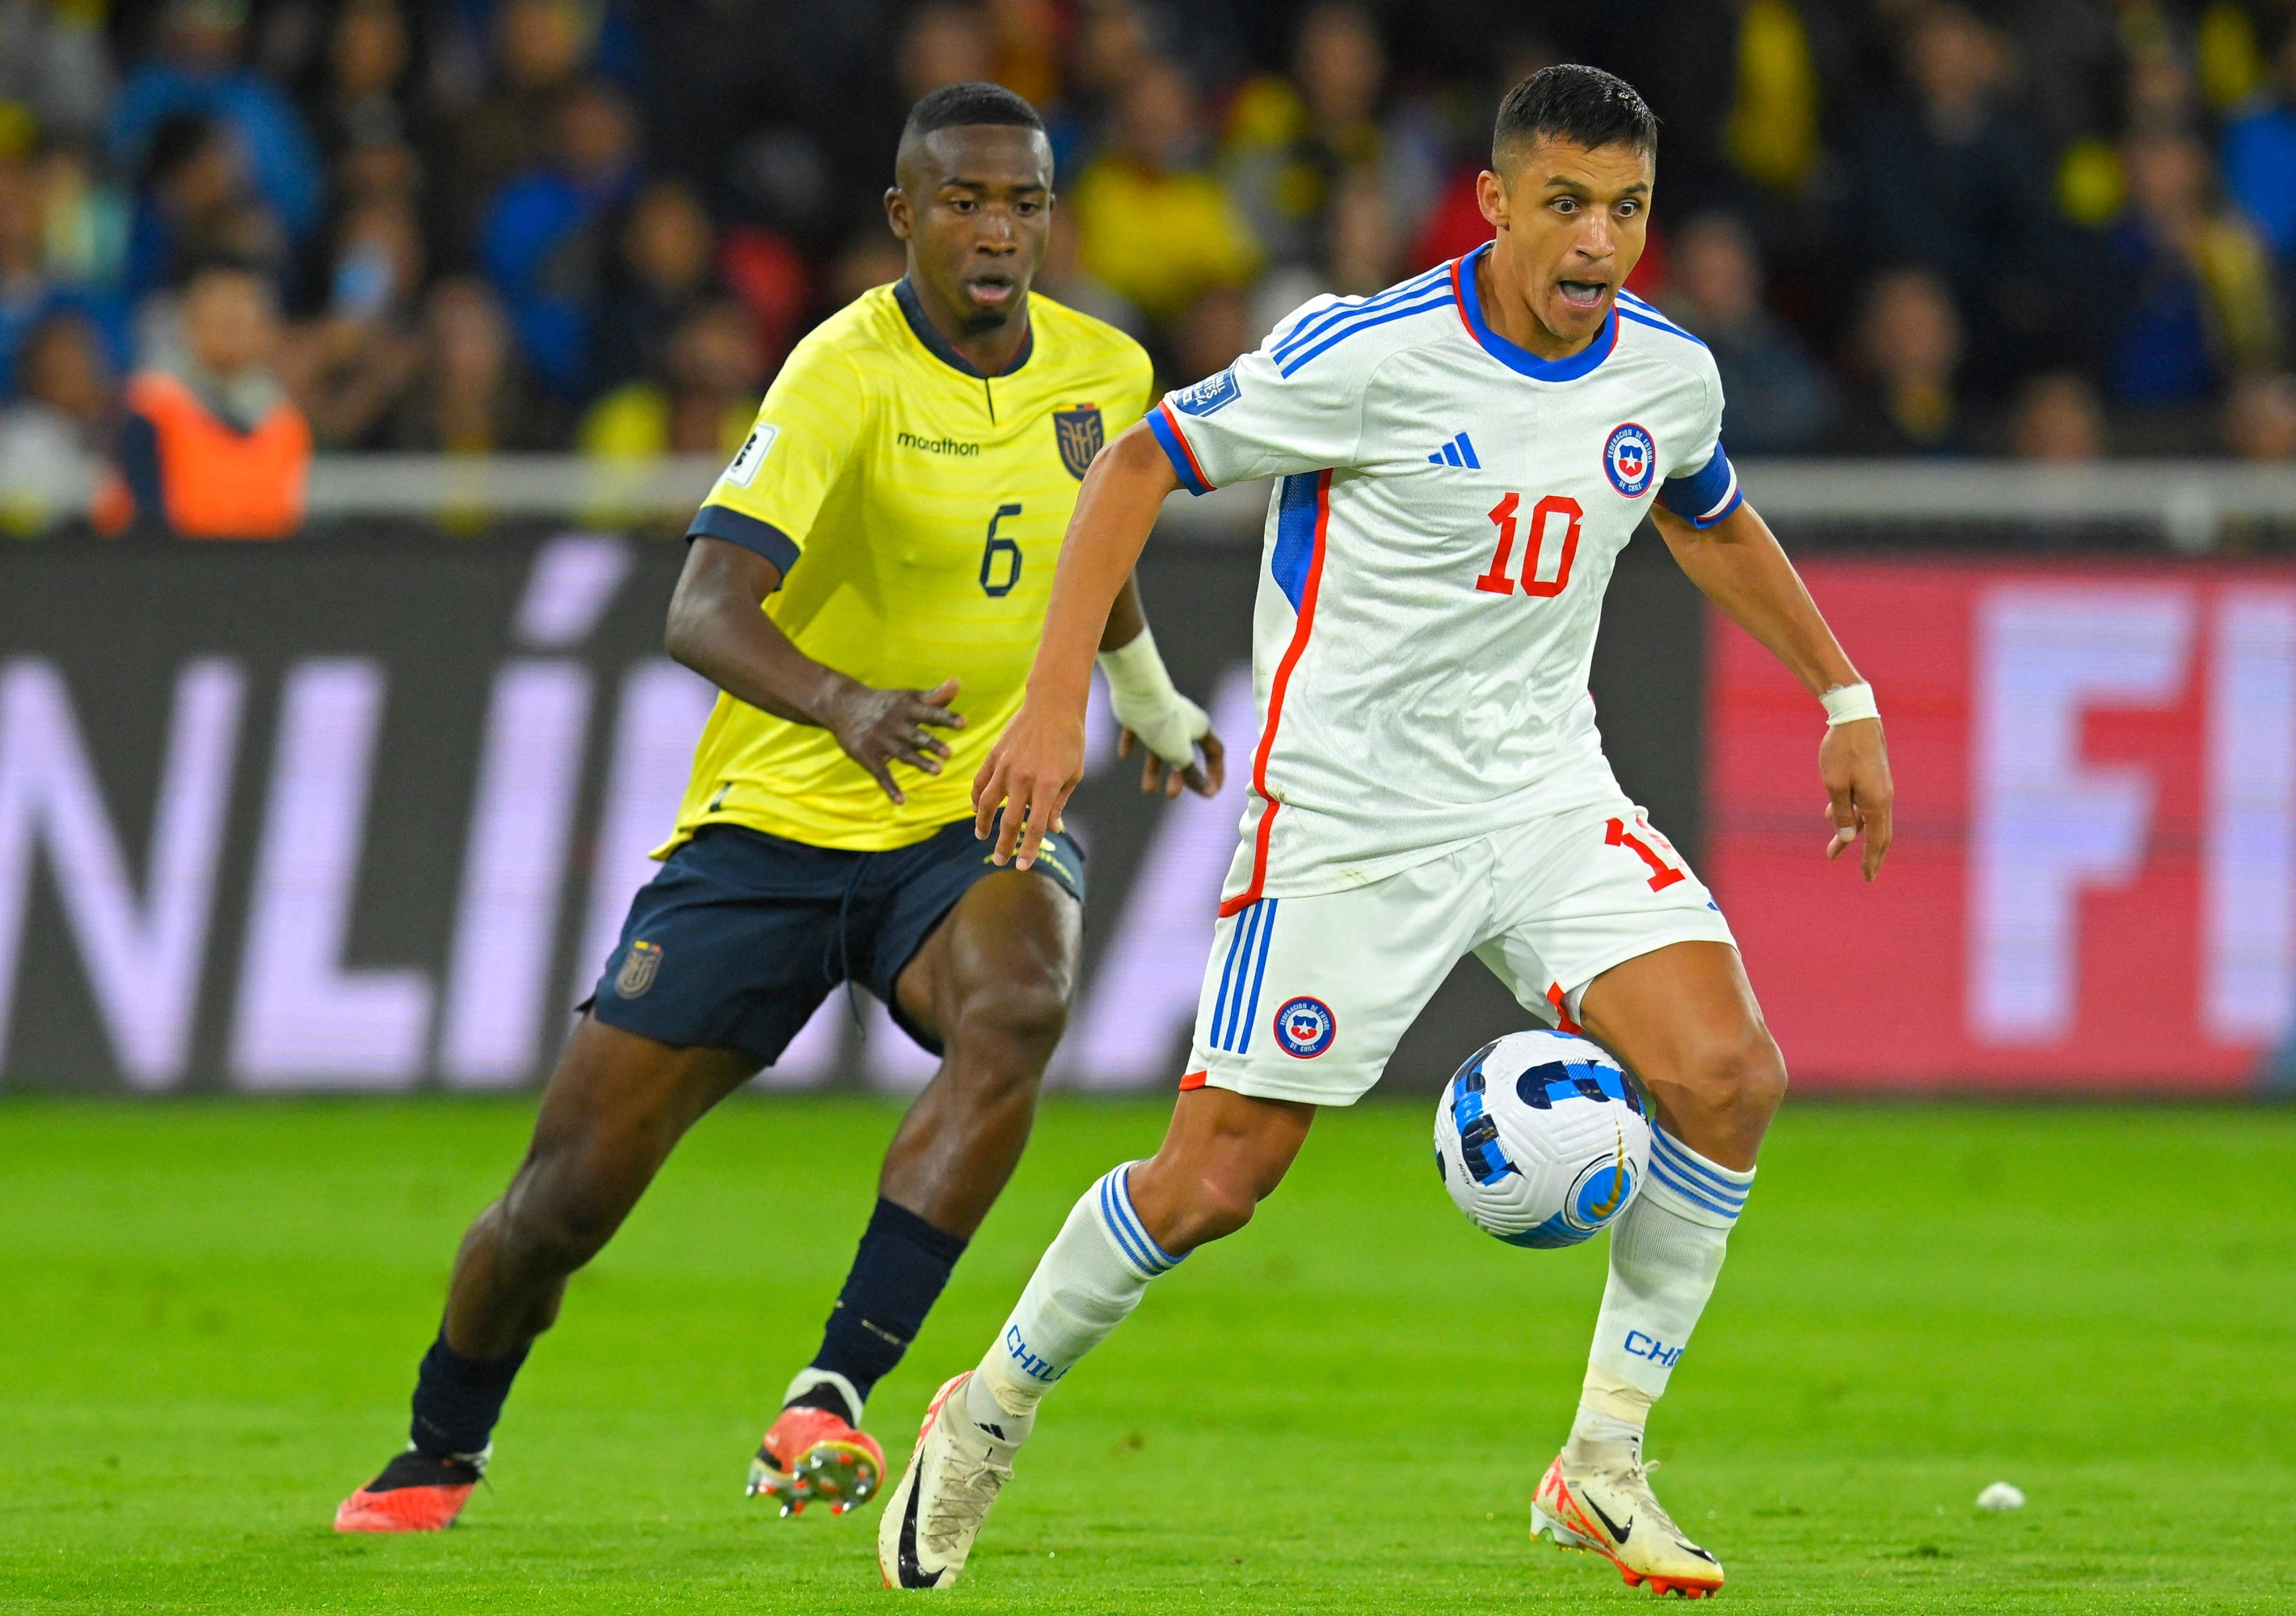 Chile's forward Alexis Sanchez (R) controls the ball in front of Ecuador's defender Willian Pacho during the 2026 FIFA World Cup South American qualification football match between Ecuador and Chile at the Rodrigo Paz Delgado Stadium in Quito on November 21, 2023. (Photo by Rodrigo BUENDIA / AFP)